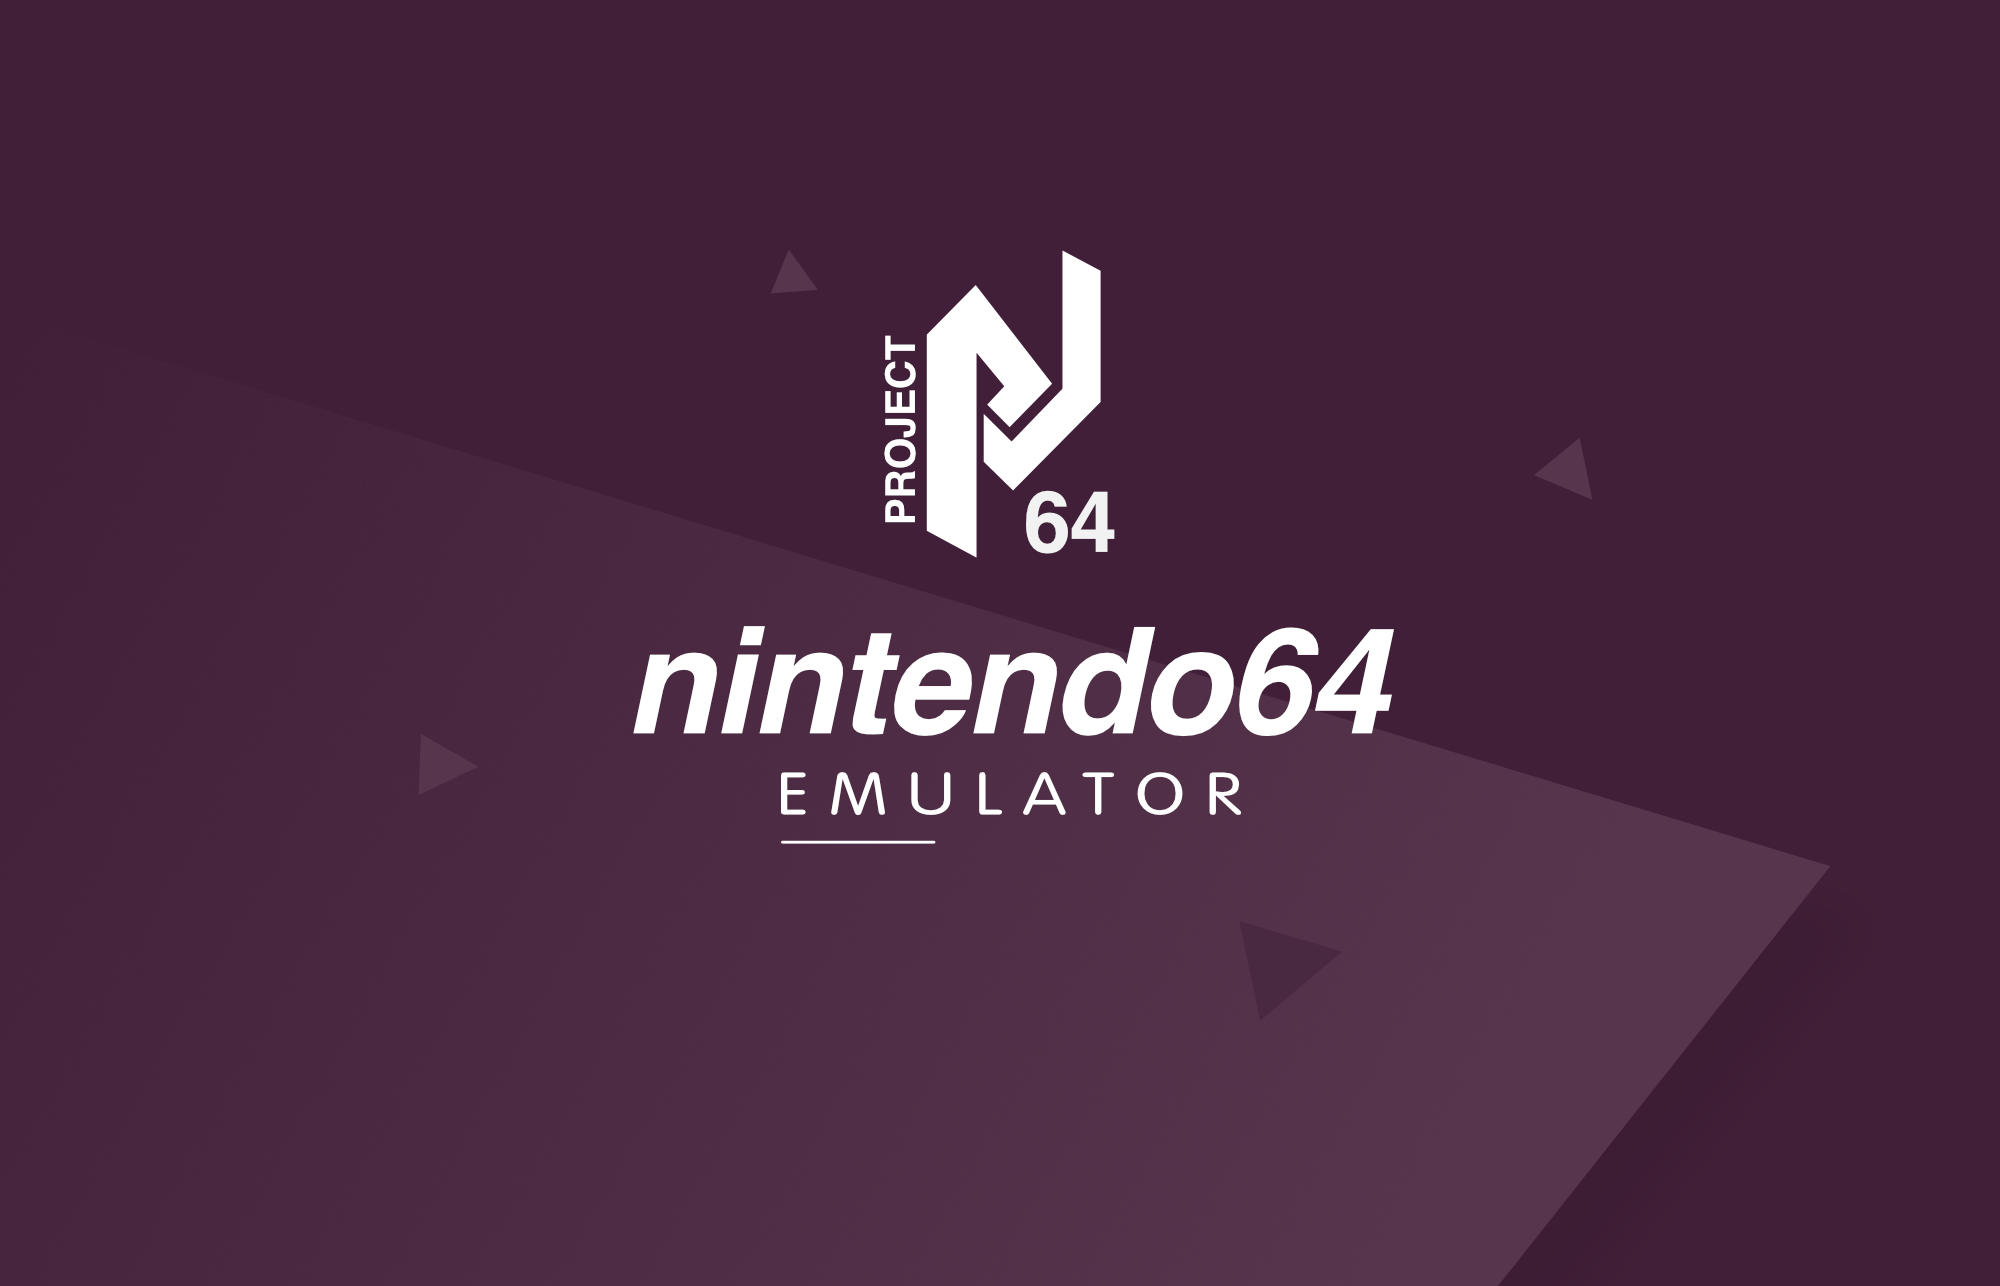 Emulator Project64 for windows, linux, macos